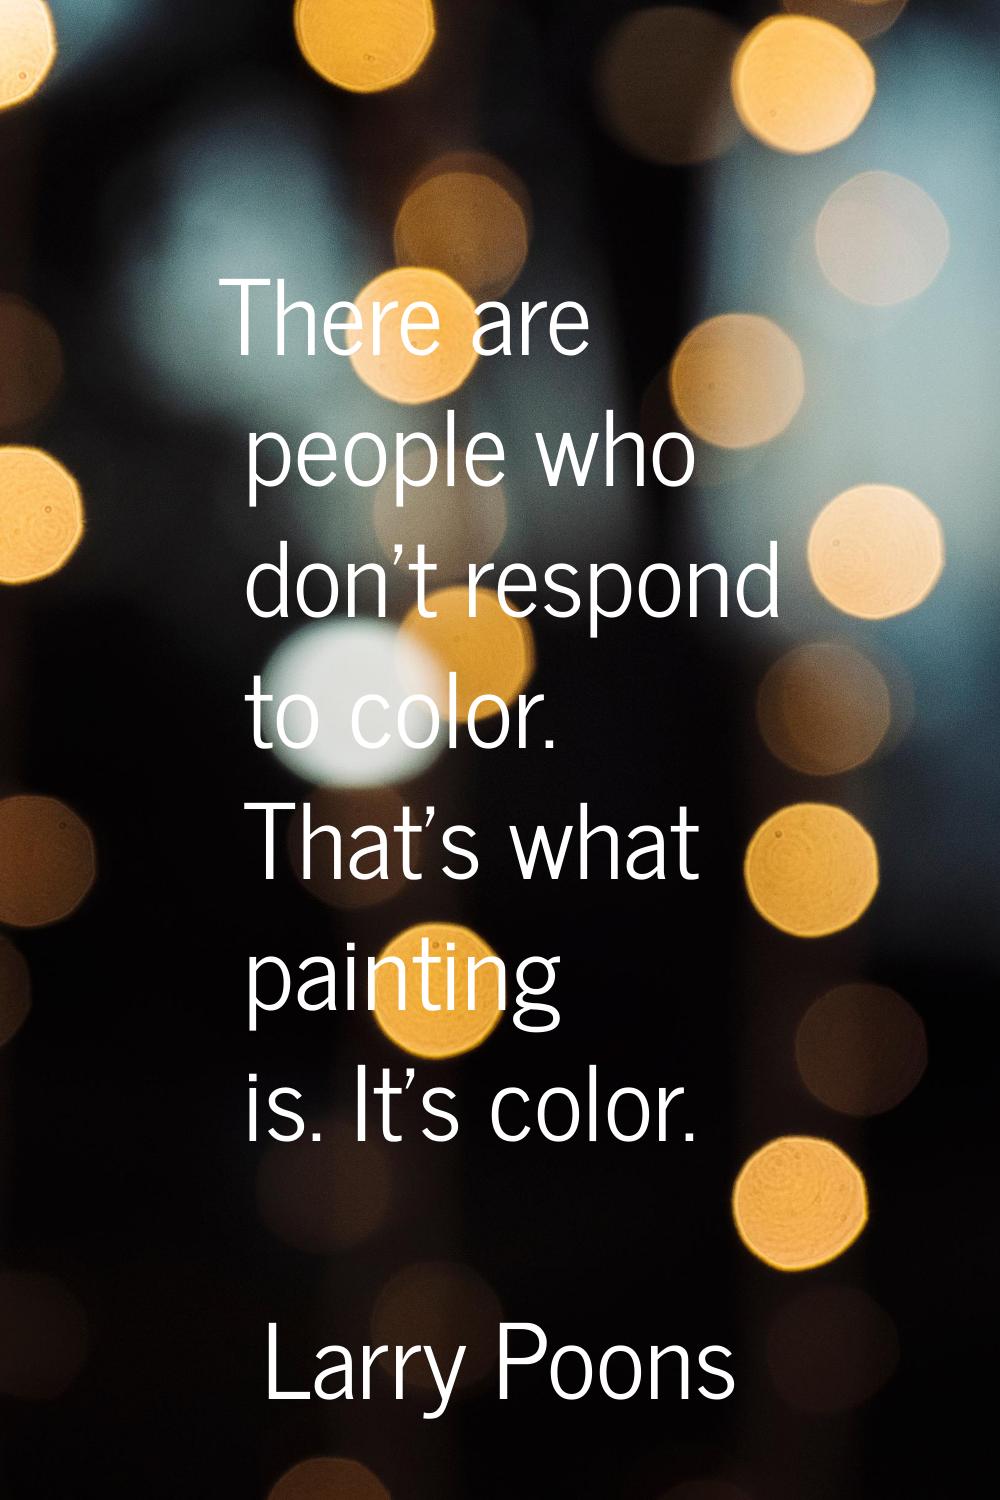 There are people who don't respond to color. That's what painting is. It's color.